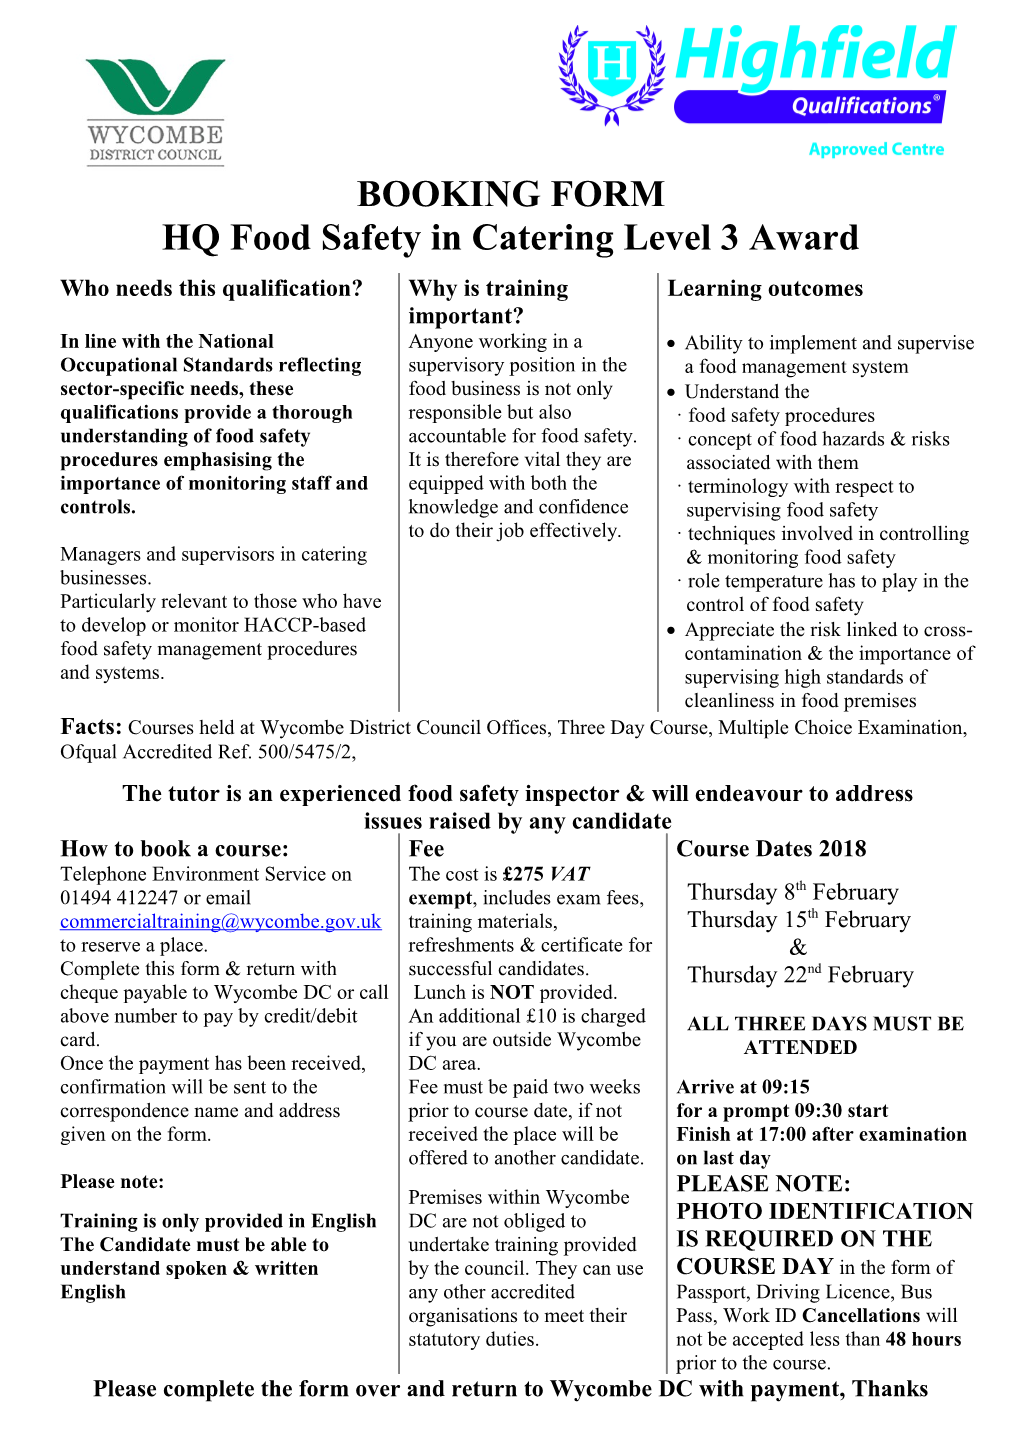 HQ Food Safety in Catering Level 3 Award